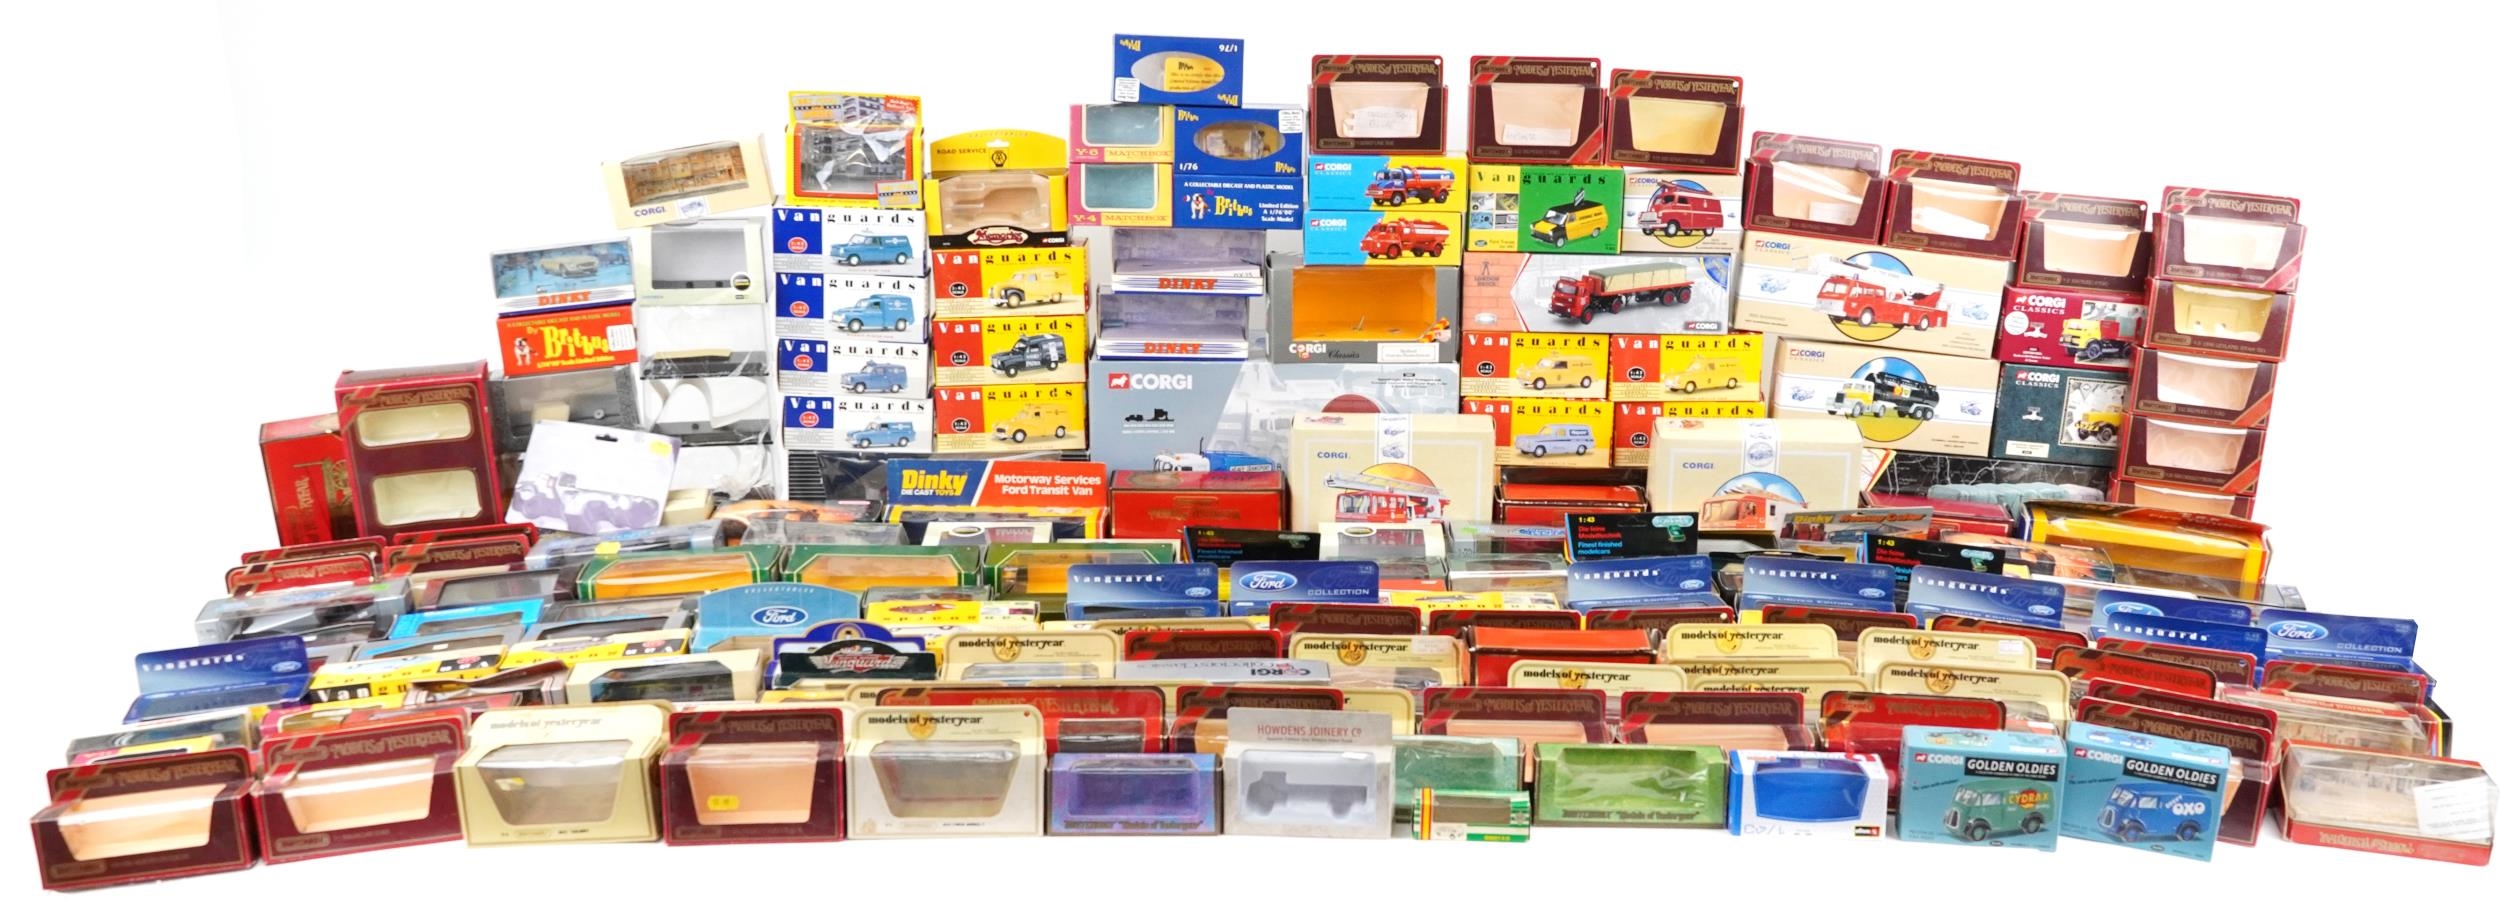 Extensive collection of model collector's vehicle boxes